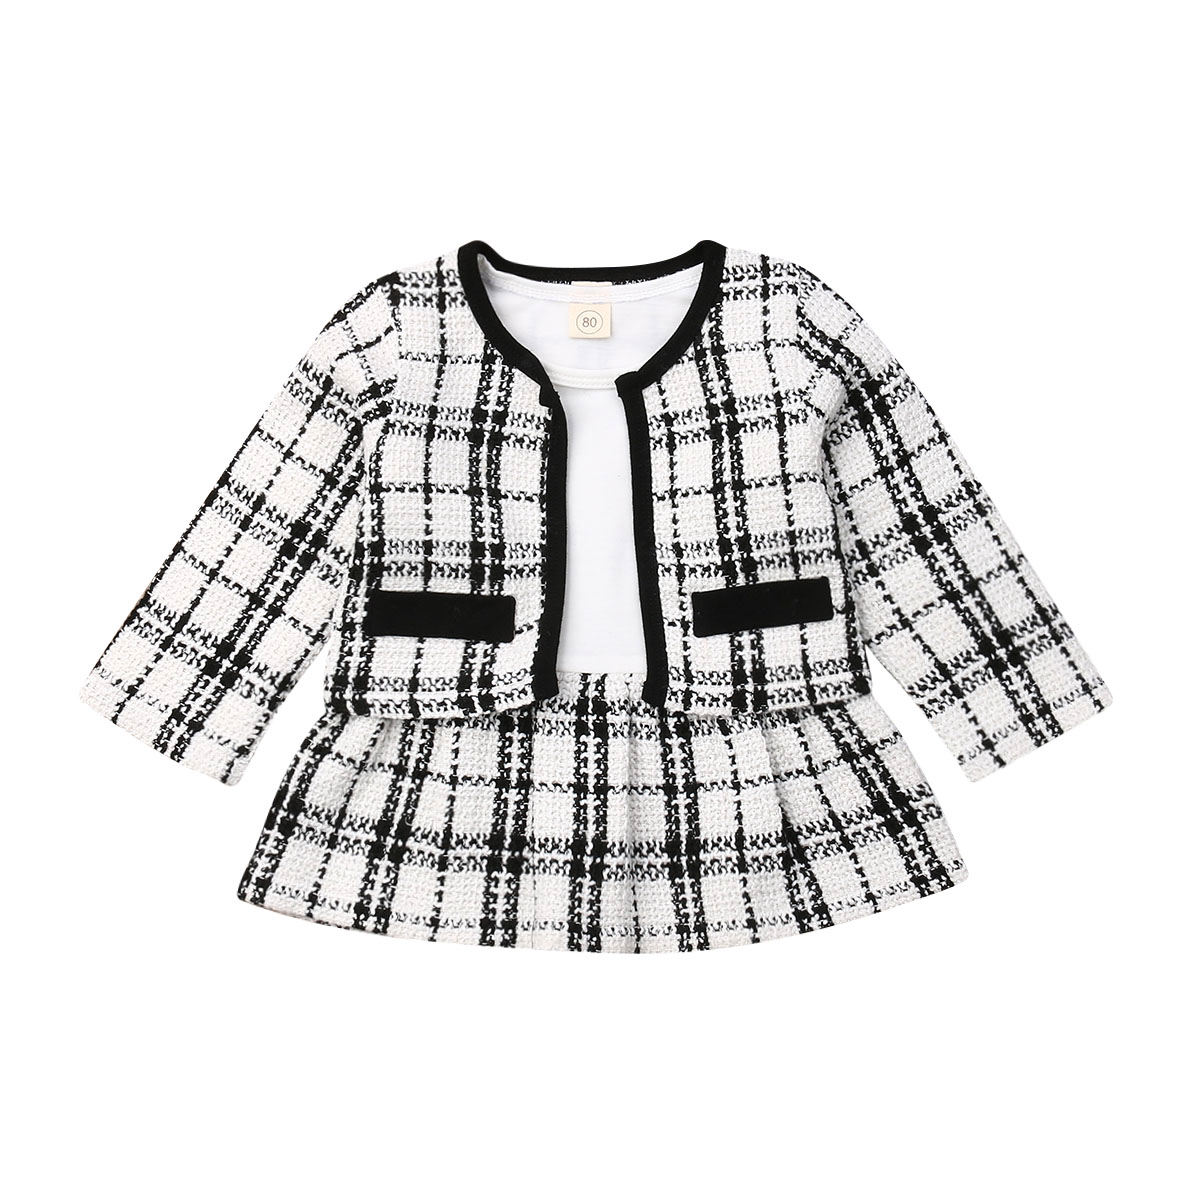 Checkered Skirt Skirt with pockets Girls Skirts Skirt Spring Clothes Girls Clothes